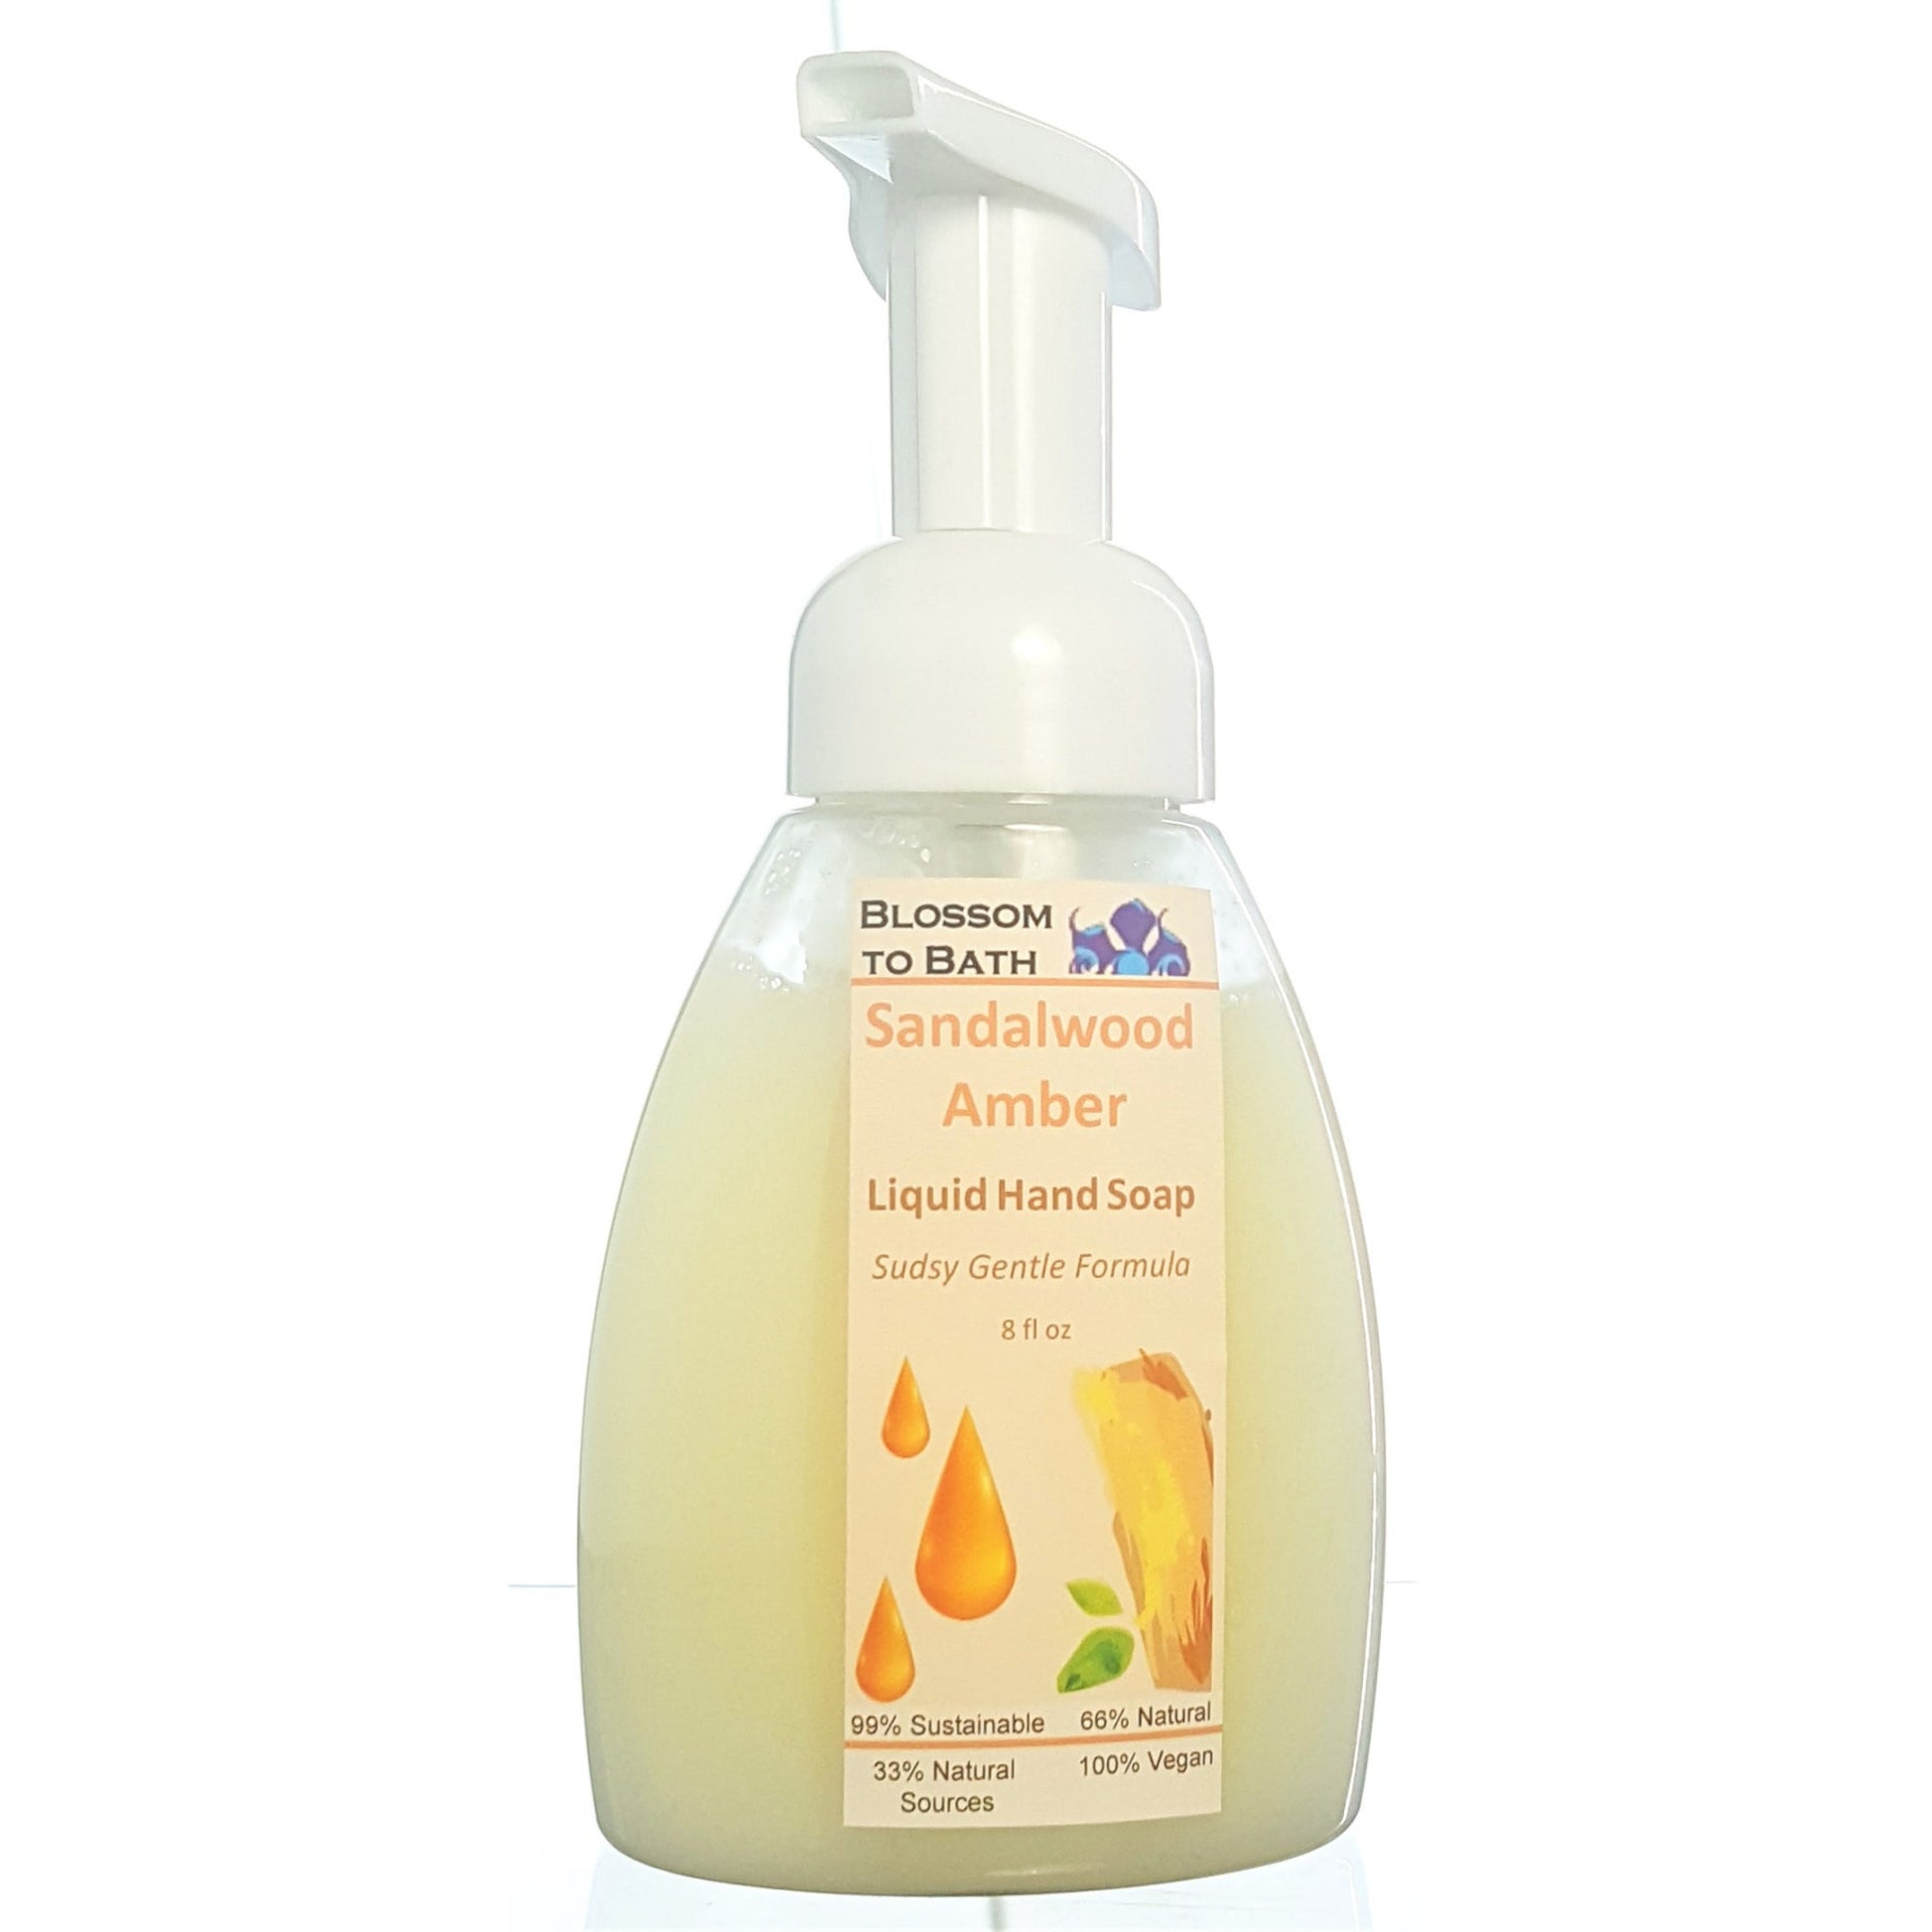 Buy Blossom to Bath Sandalwood Amber Liquid Hand Soap from Flowersong Soap Studio.  Get clean hands without drying in a convenient foaming pump  An irresistible combination of warm sandalwood and spice.